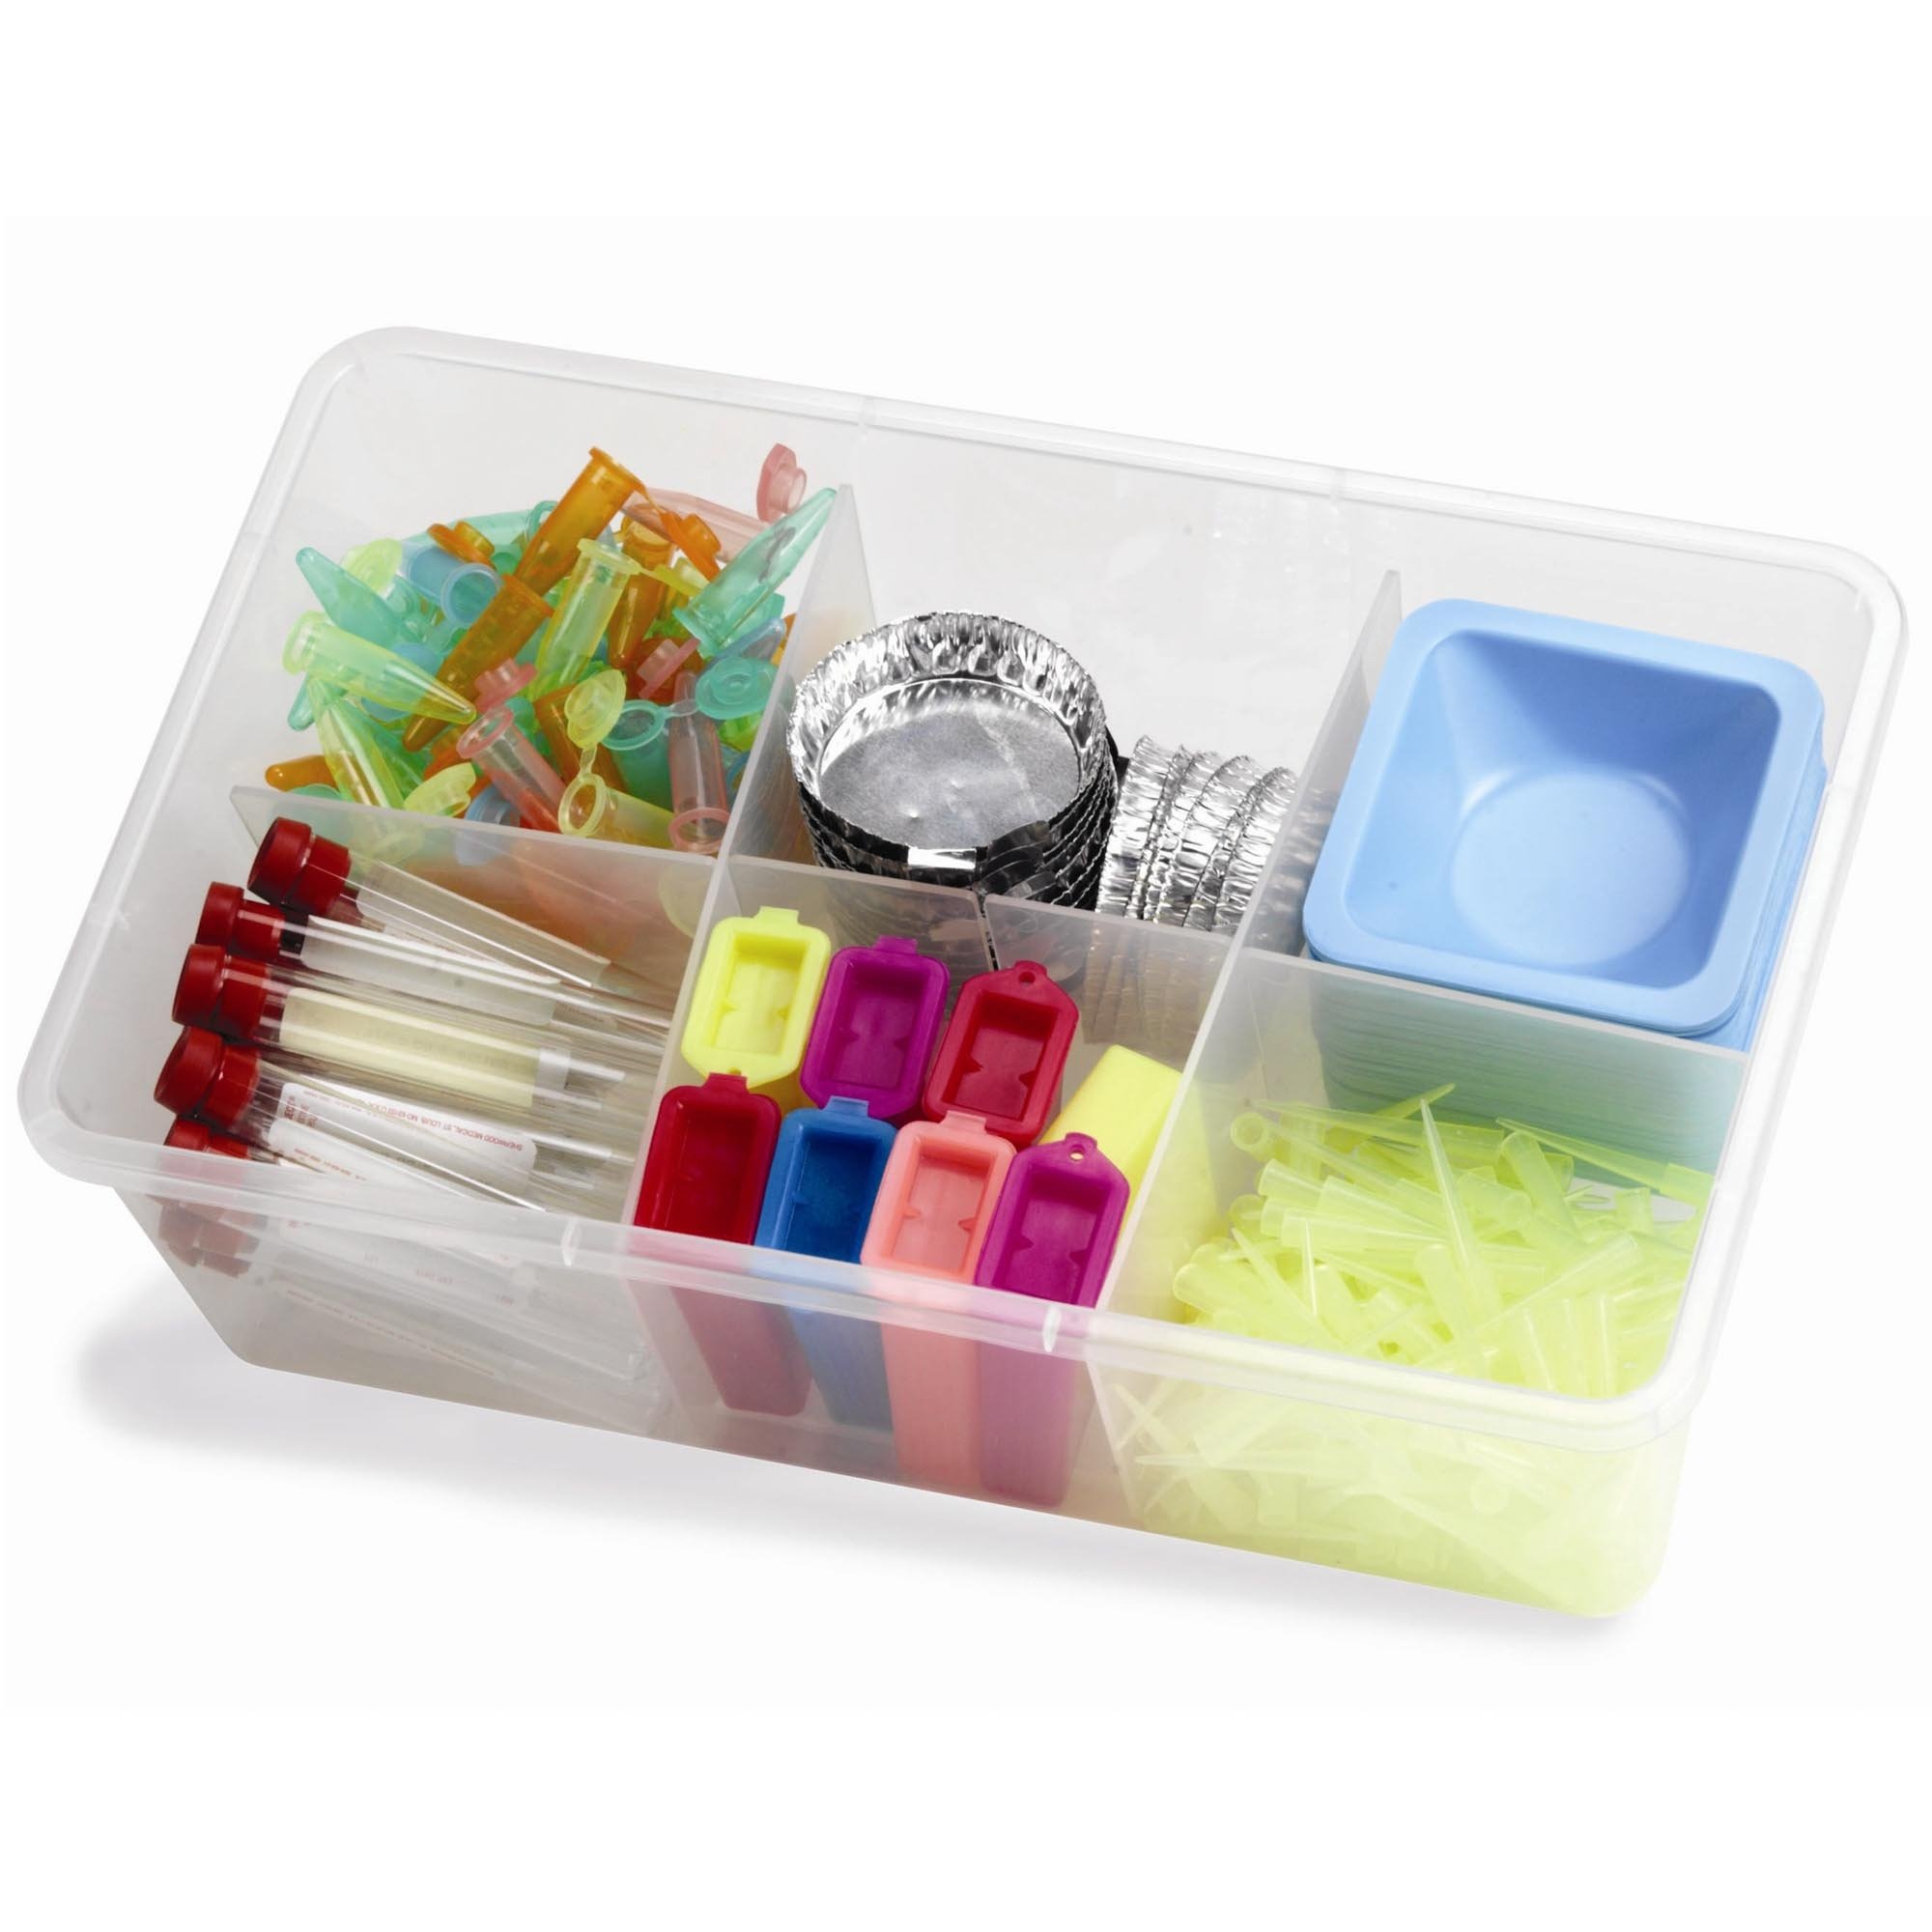 https://www.universalmedicalinc.com/media/catalog/product/cache/b4c565ddf1bc021465048acd78c313cc/h/s/hs23453_tubby-storage-container-with-lid-and-divider-open.jpg